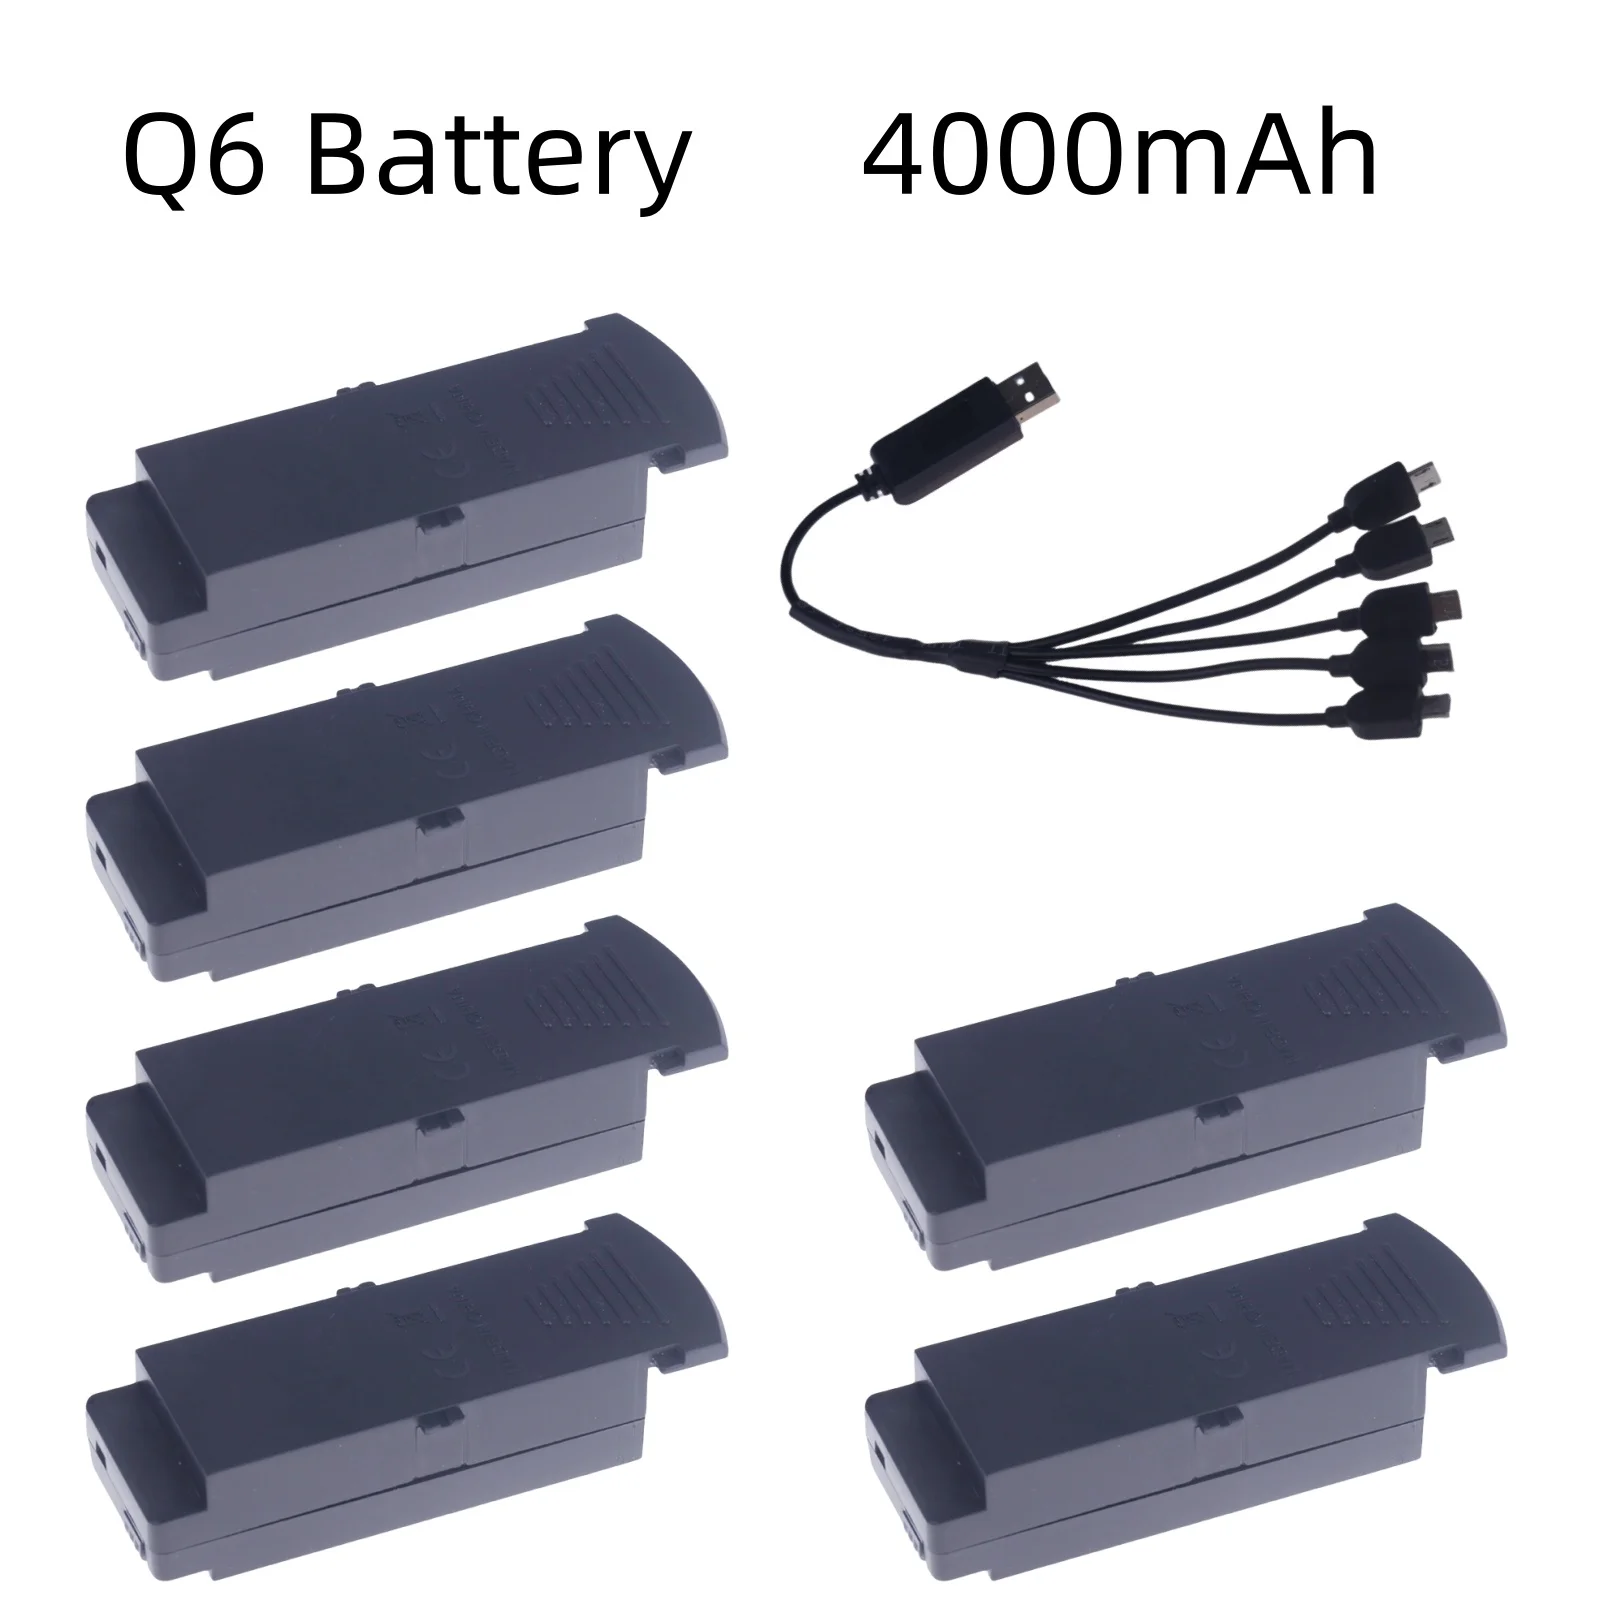 

Original Q6 S6 G6 T6 K5 3.7V Battery 4000mah for Q6 S6 G6 T6 K5 8K RC Quadcopter Spare Parts For Q6 Drones Battery 1800mAh